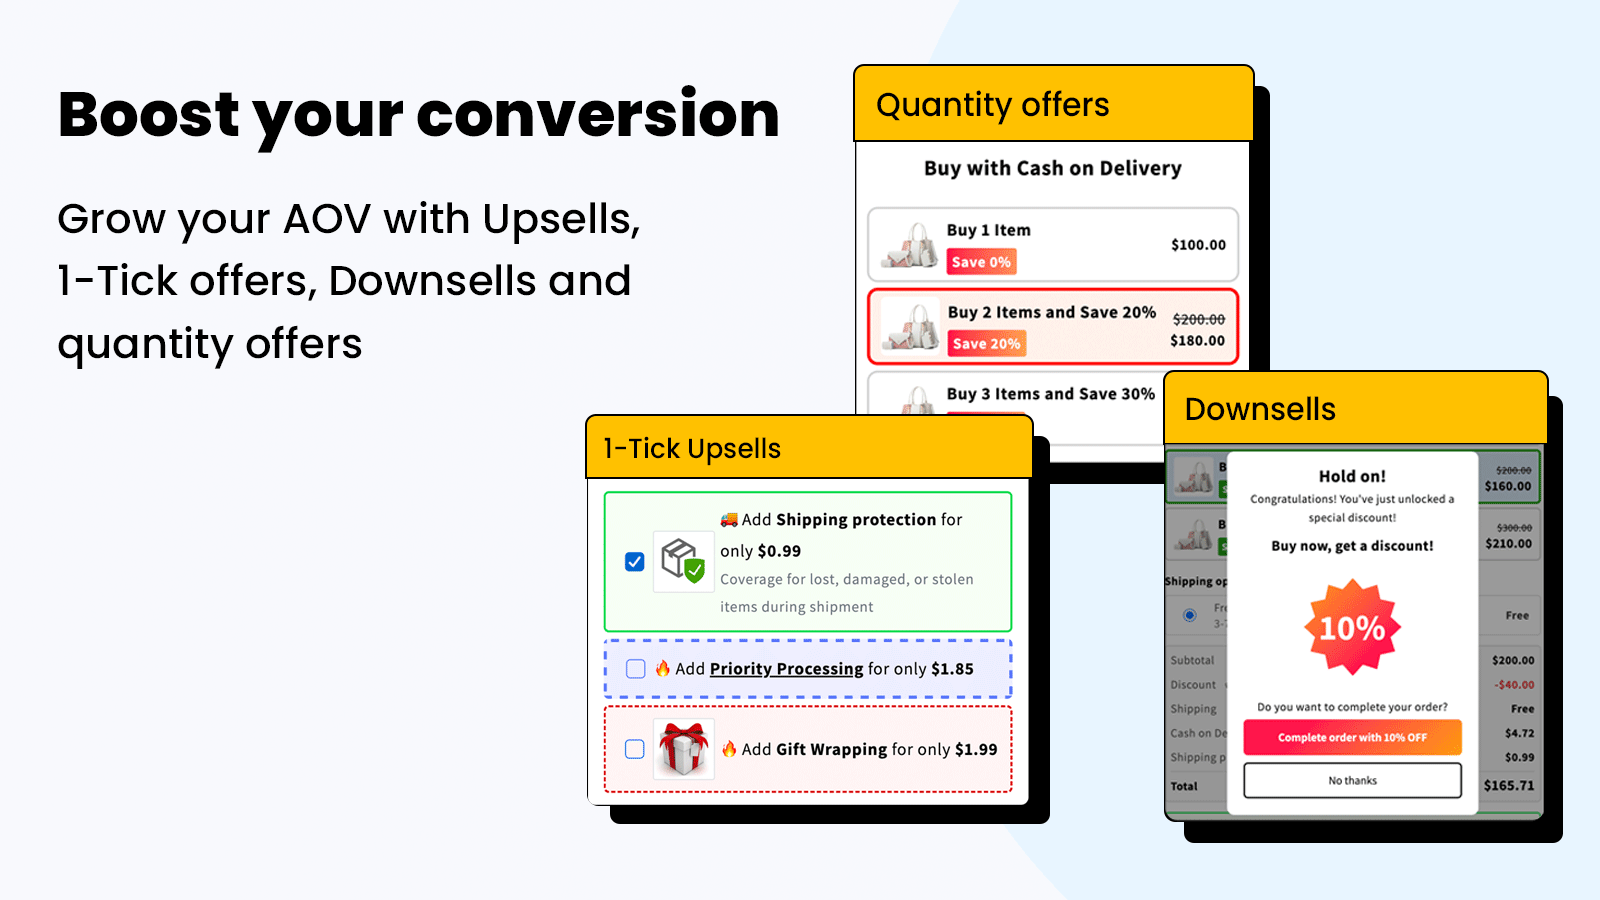 Grow AOV with Upsells, quantity offers, downsells, 1-tick upsell